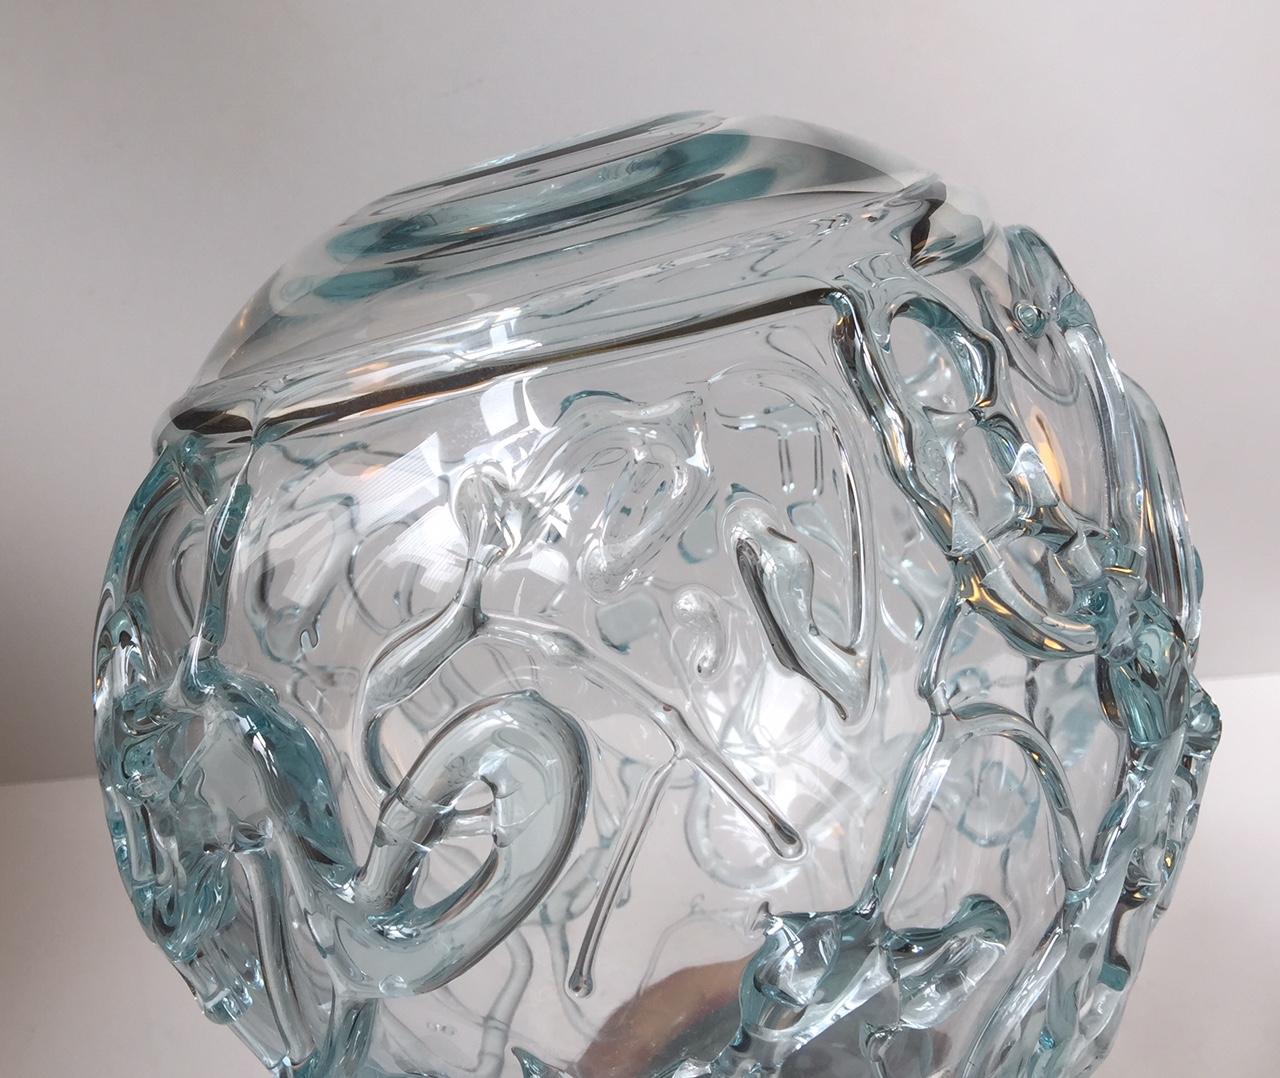 Unique Spherical and Abstract Glass Vase by Michael Bang for Holmegaard, Denmark 1